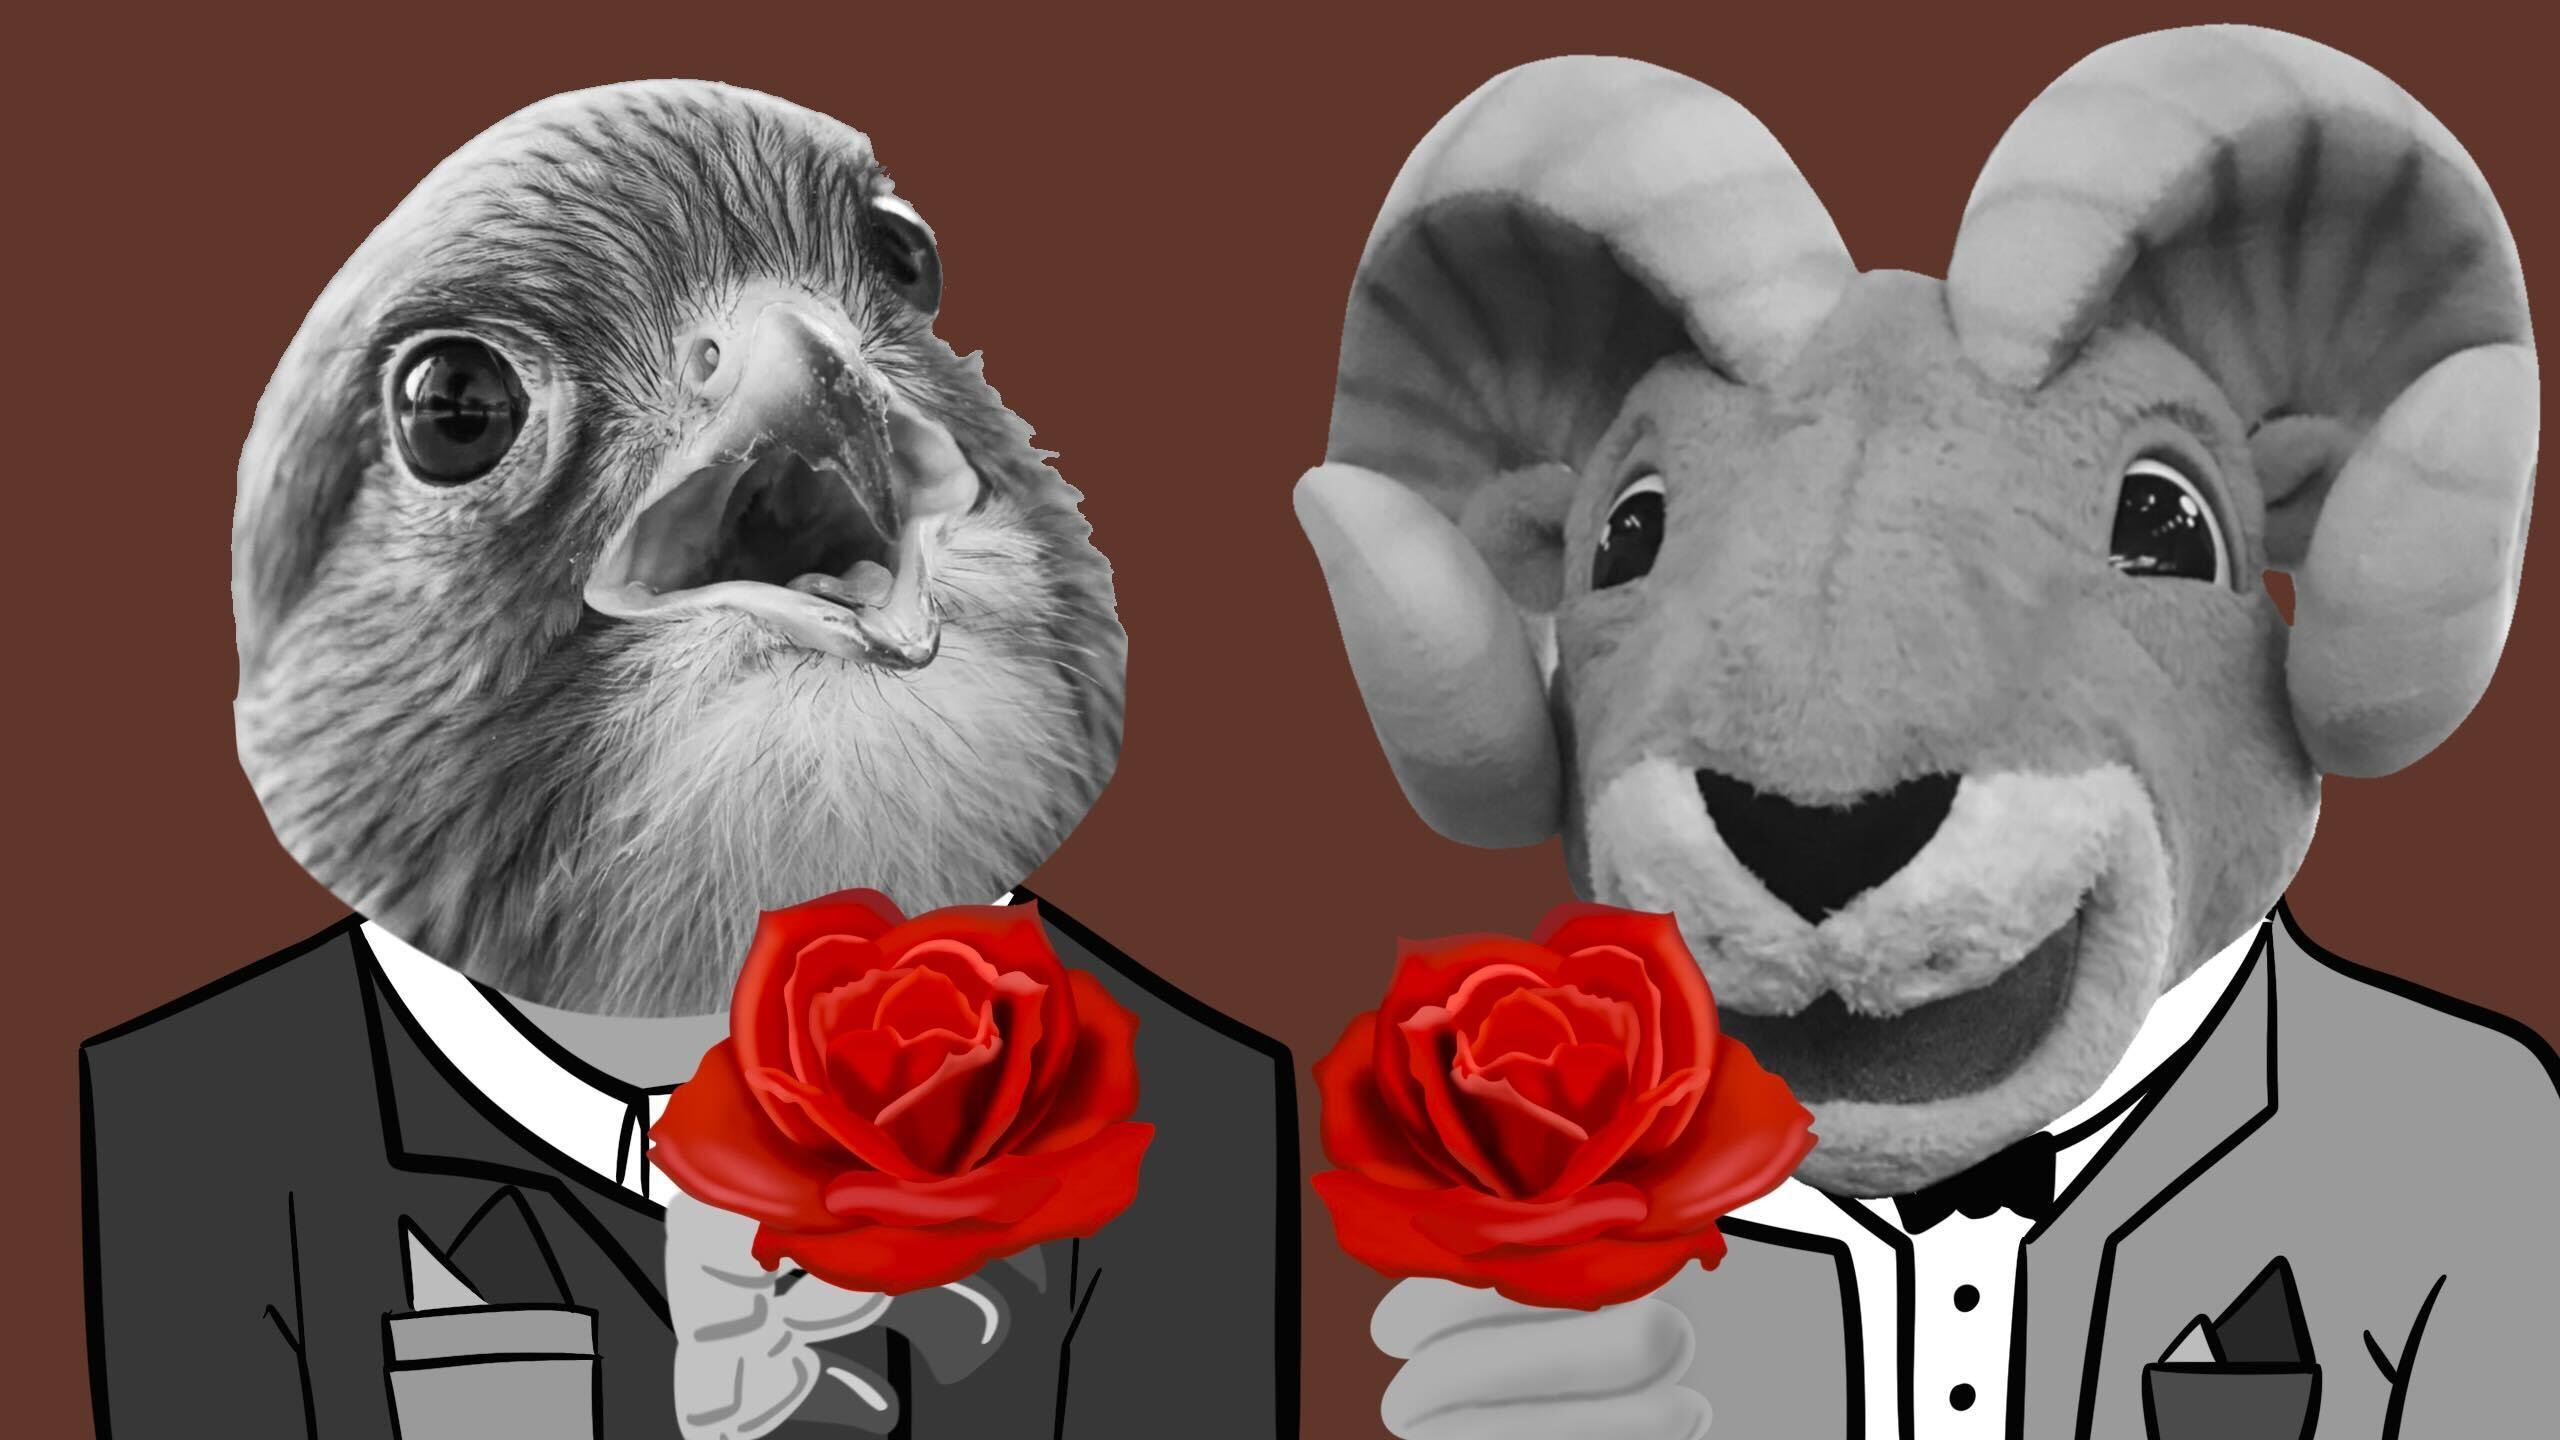 A falcon and ram wearing a tuxedo holding roses while standing next to each other